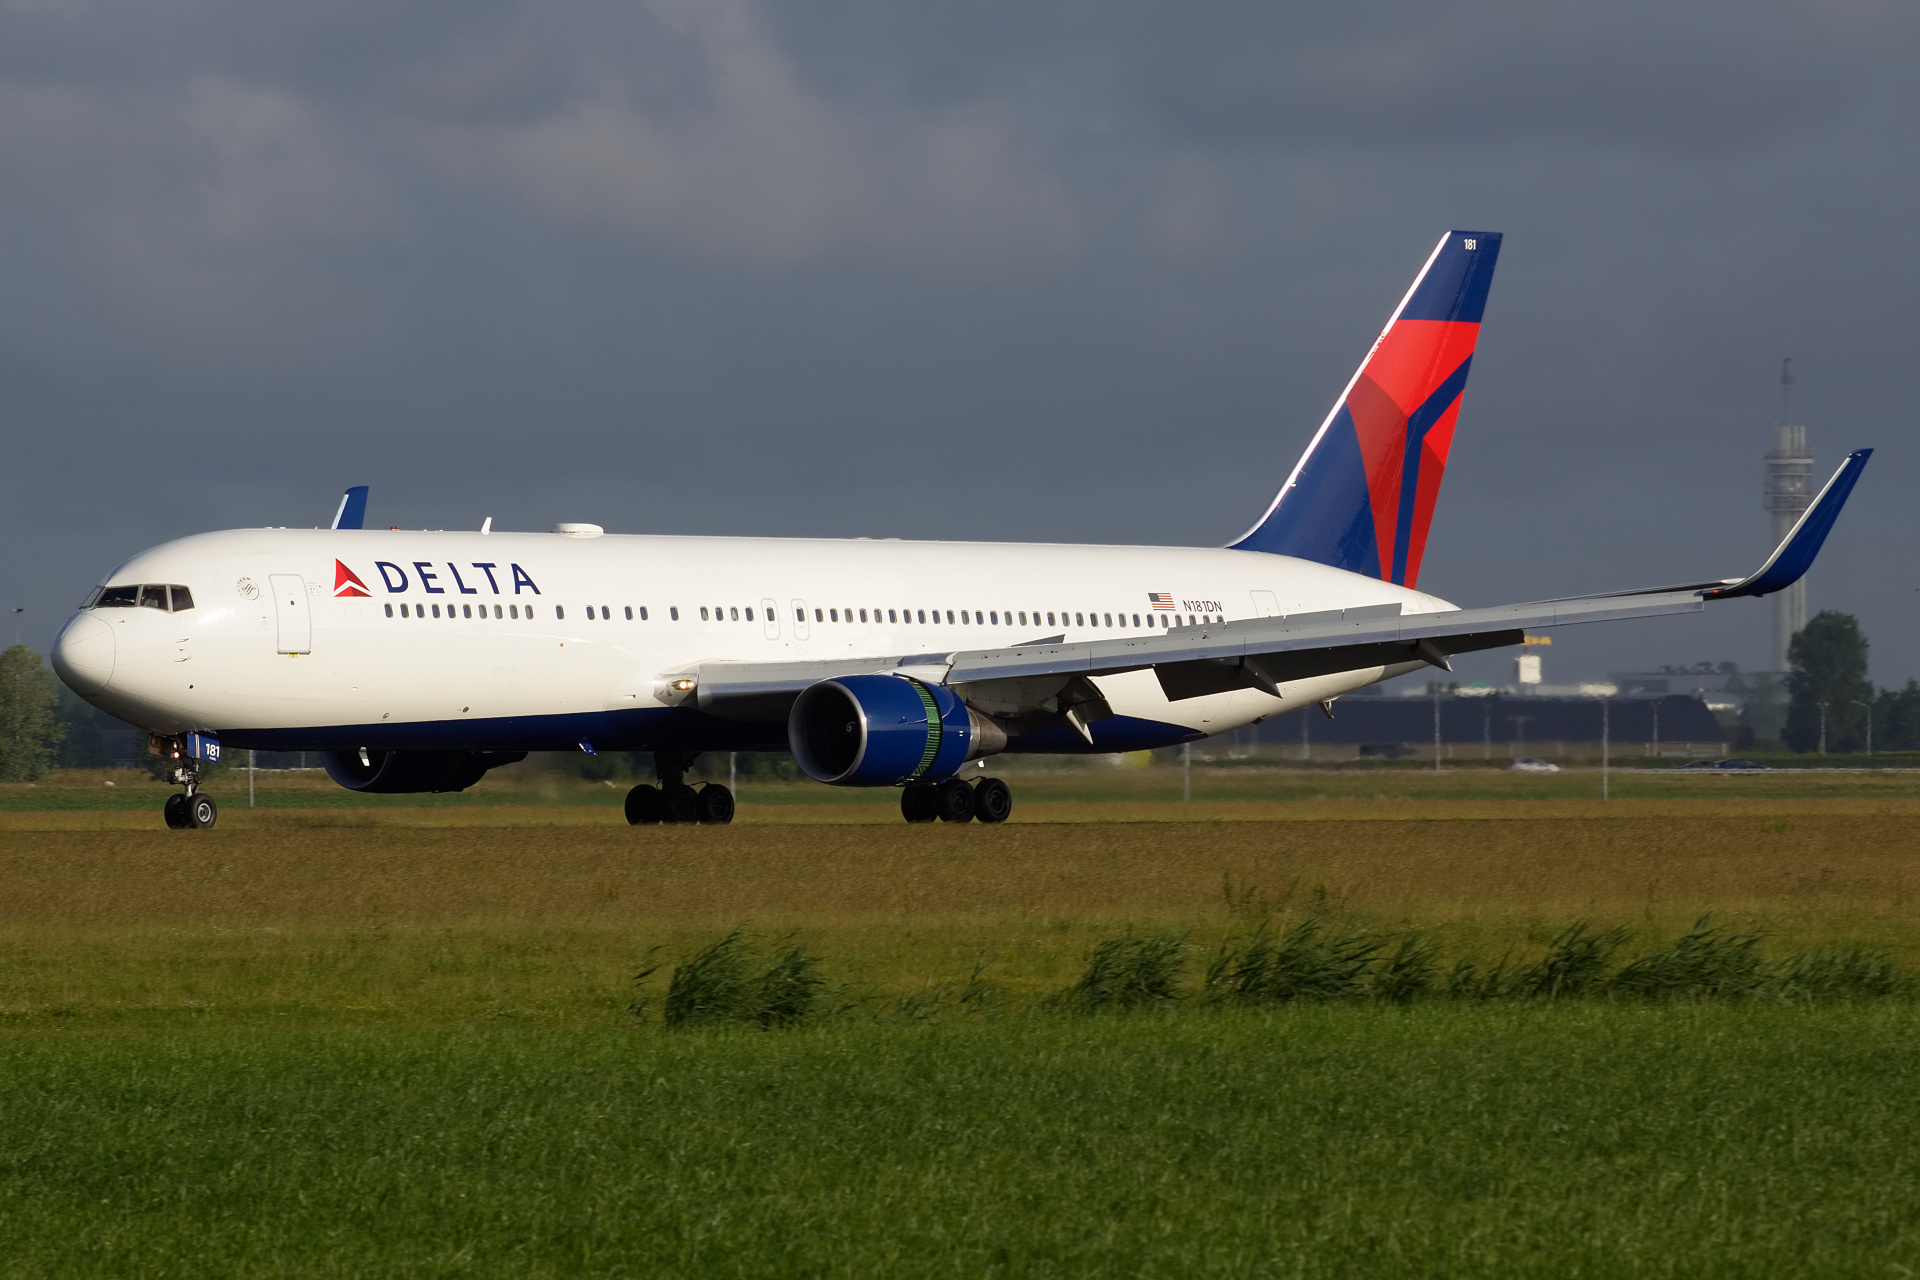 N181DN (Aircraft » Schiphol Spotting » Boeing 767-300 » Delta Airlines)